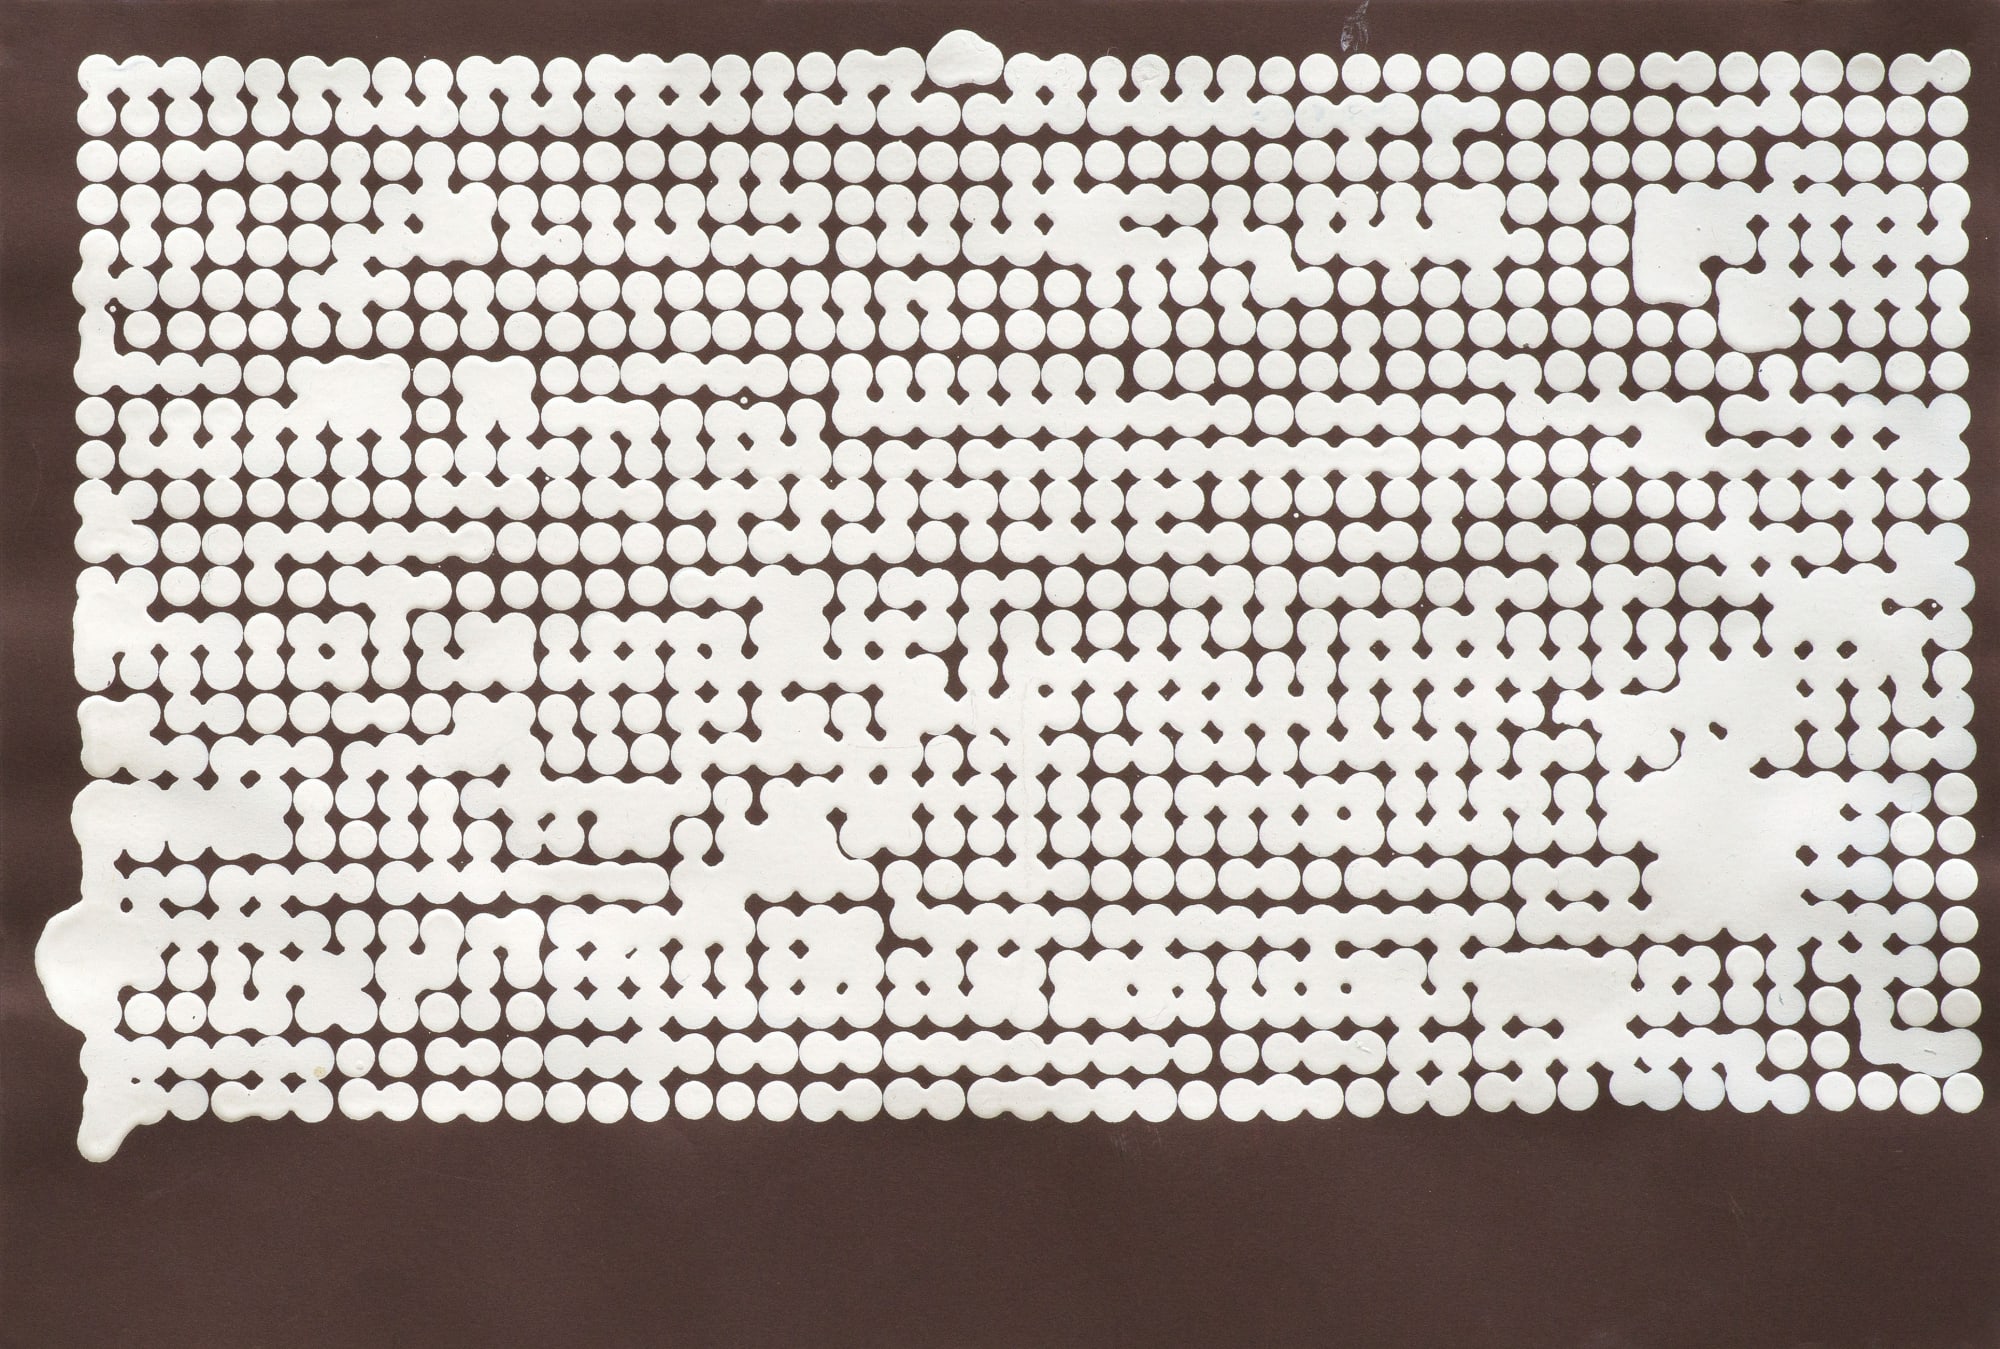 White Dots on Coloured Ground, 2007